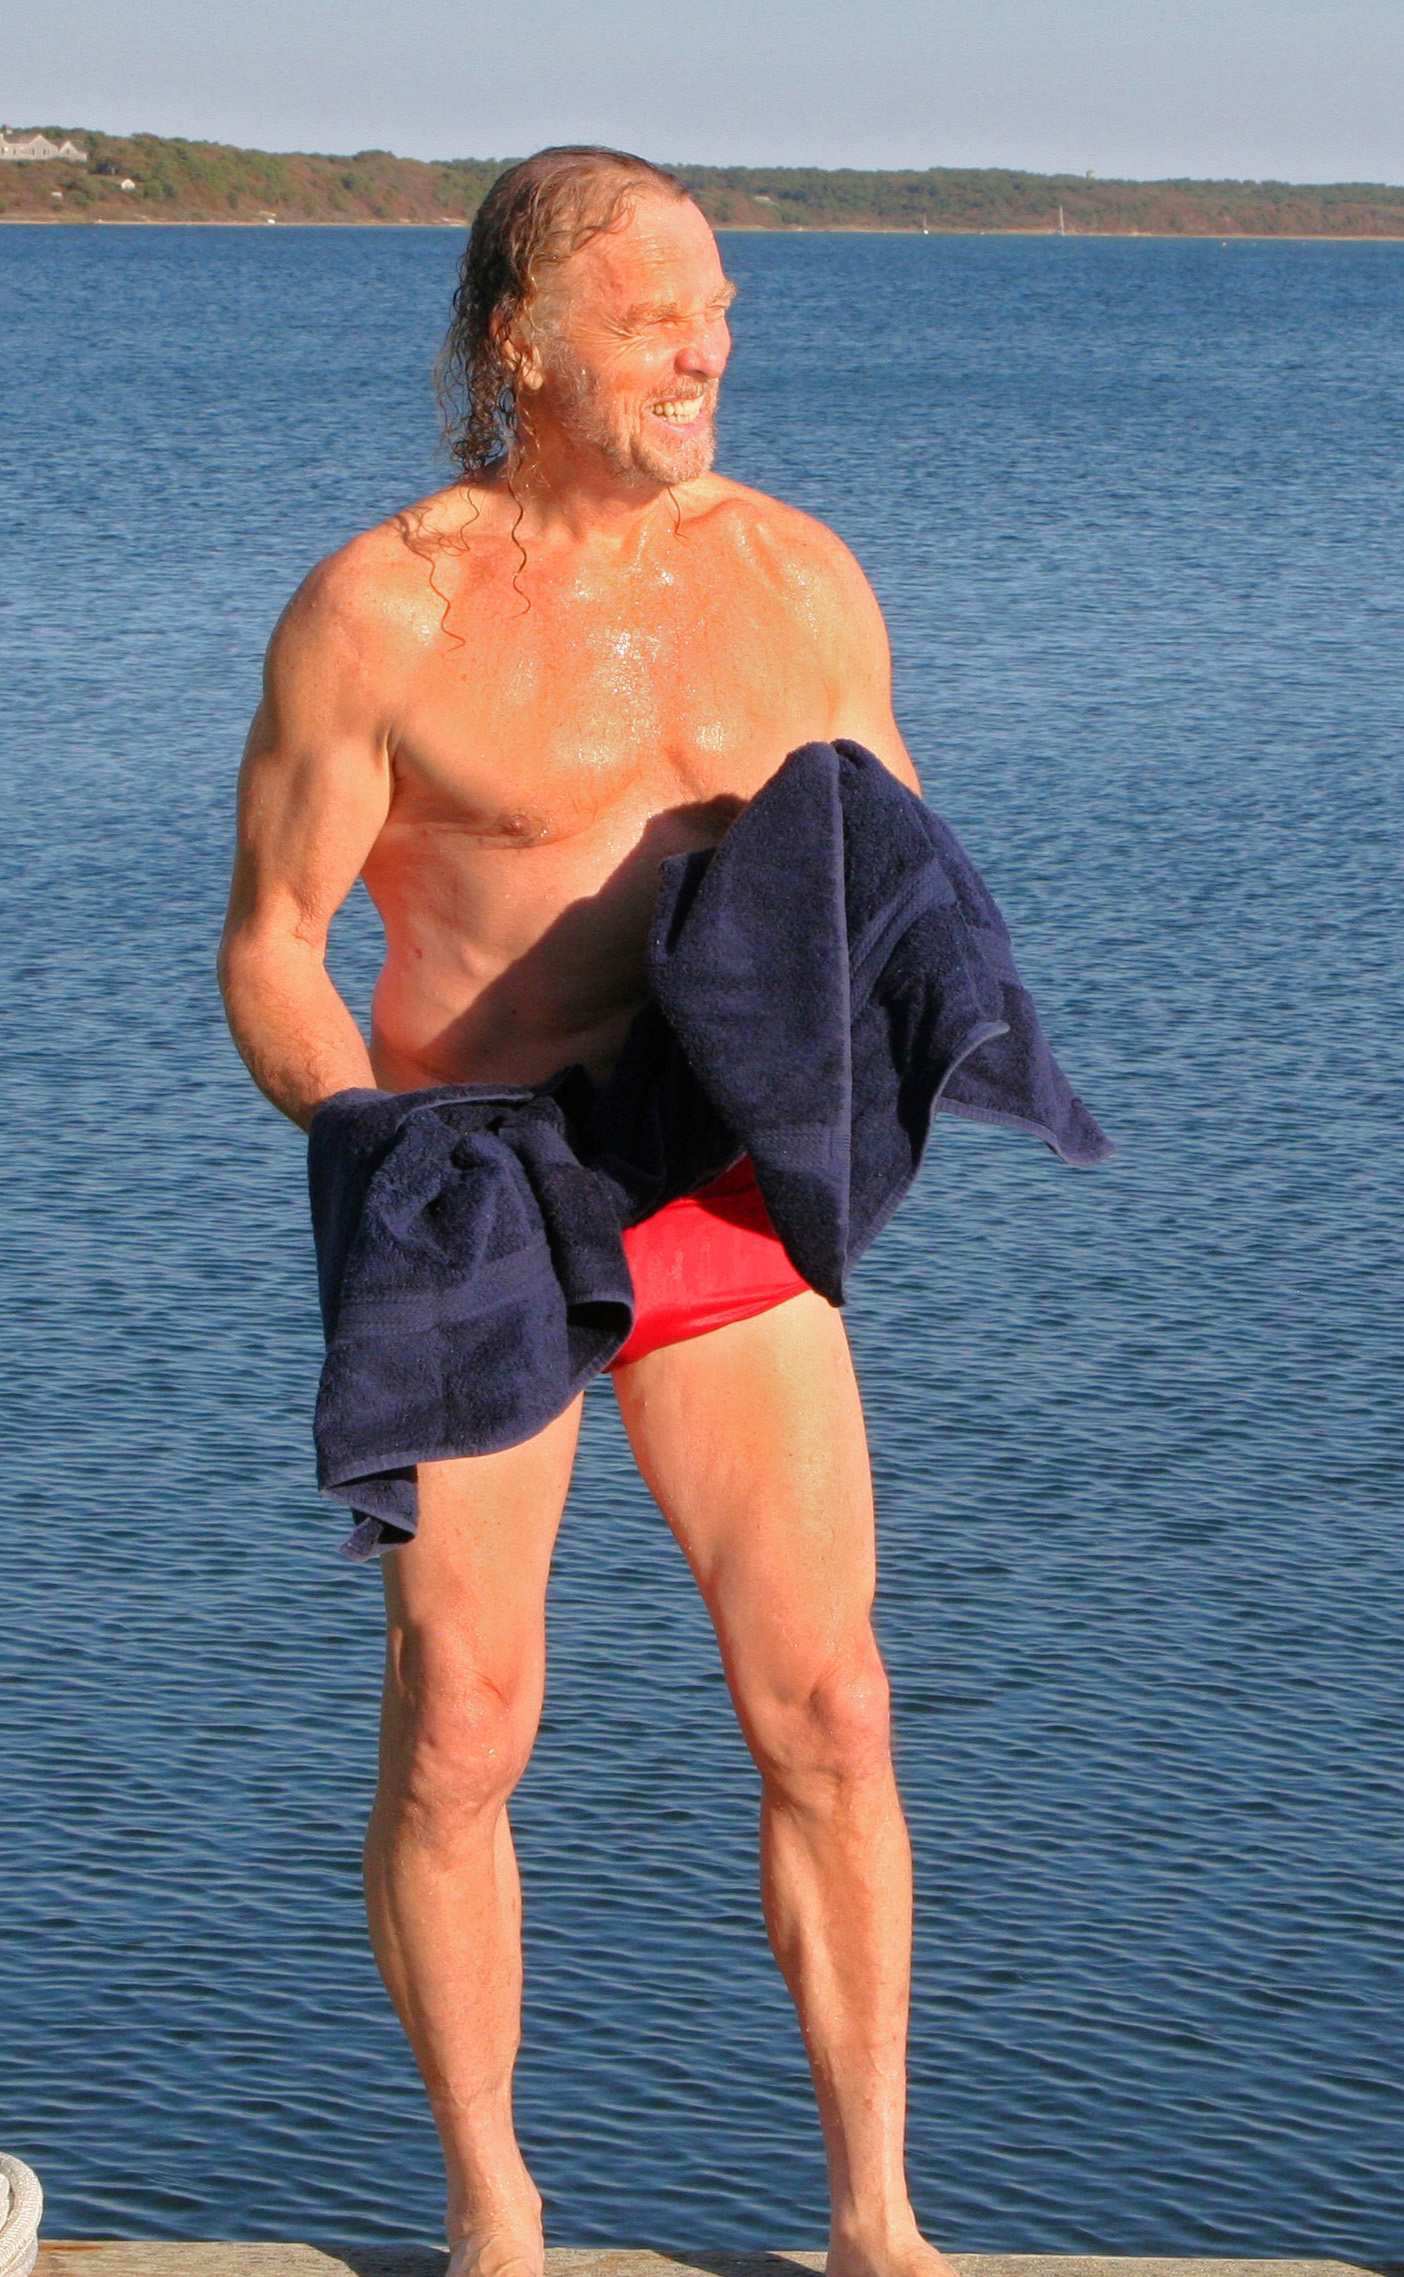 Due to the cold water temps - this photo was taken after my last swim of the 2012 fall season on Martha's Vineyard. The location is behind my home on Katama Bay.